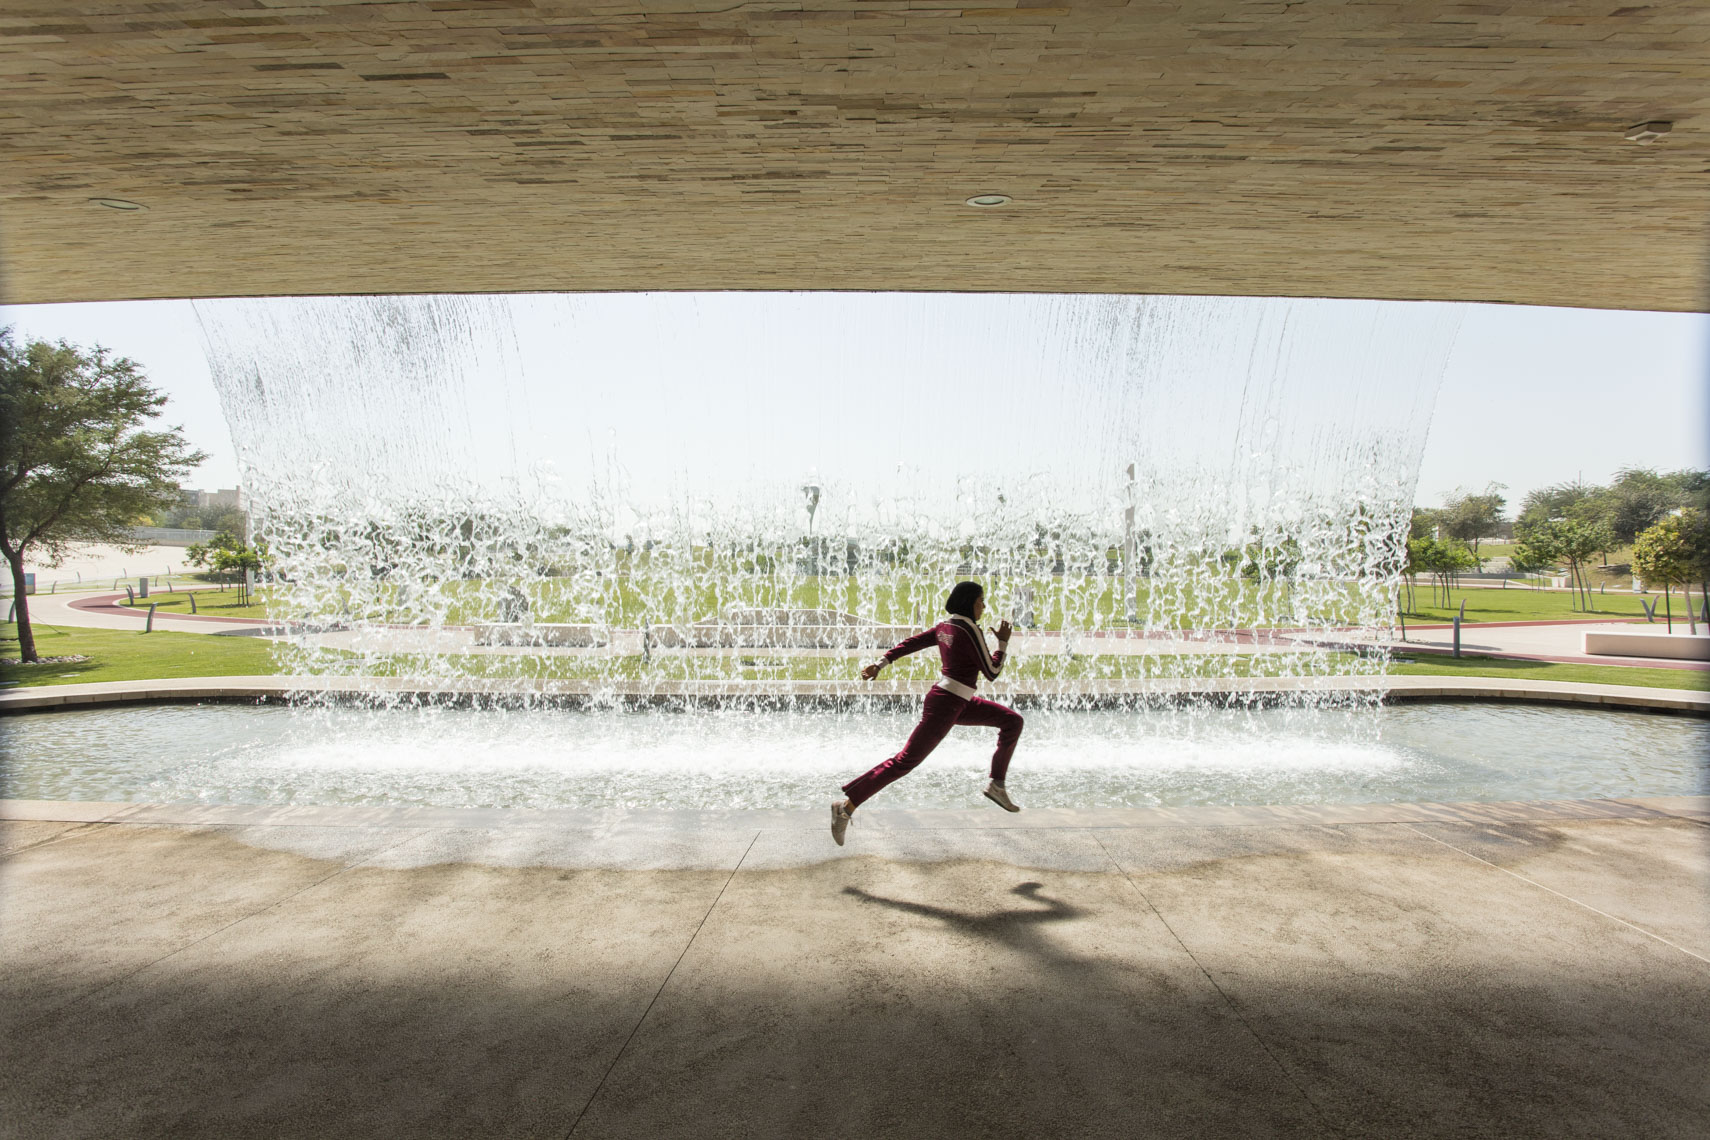 A muslim student athlete trains in front of a waterfall in Doha, Qatar in a photo by Ryan Donnell